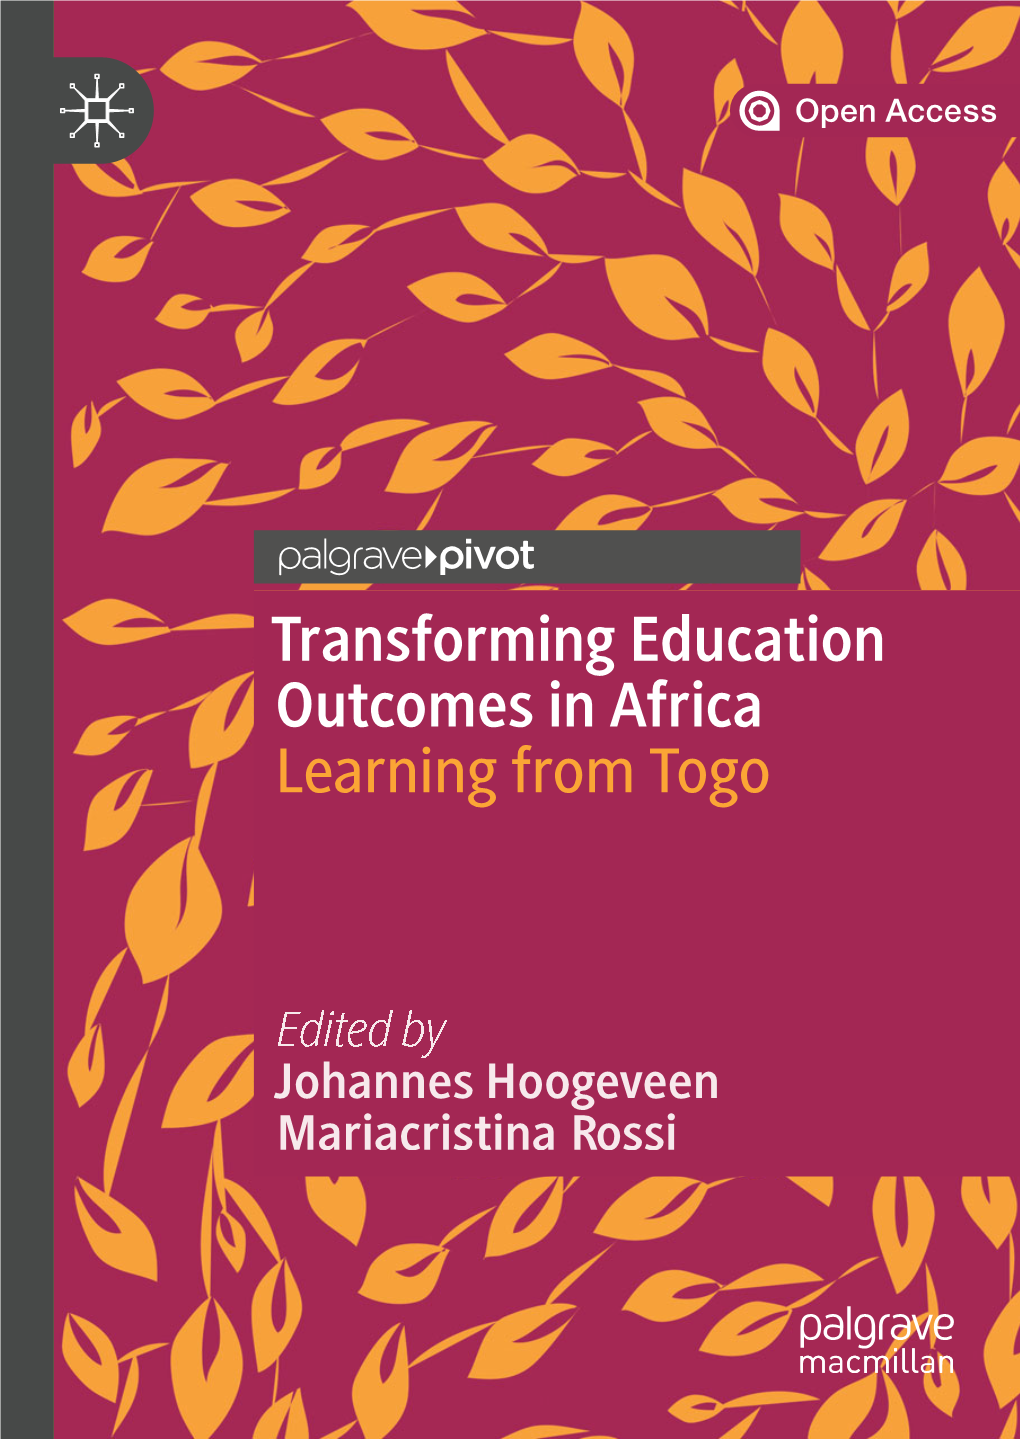 Transforming Education Outcomes in Africa Learning from Togo